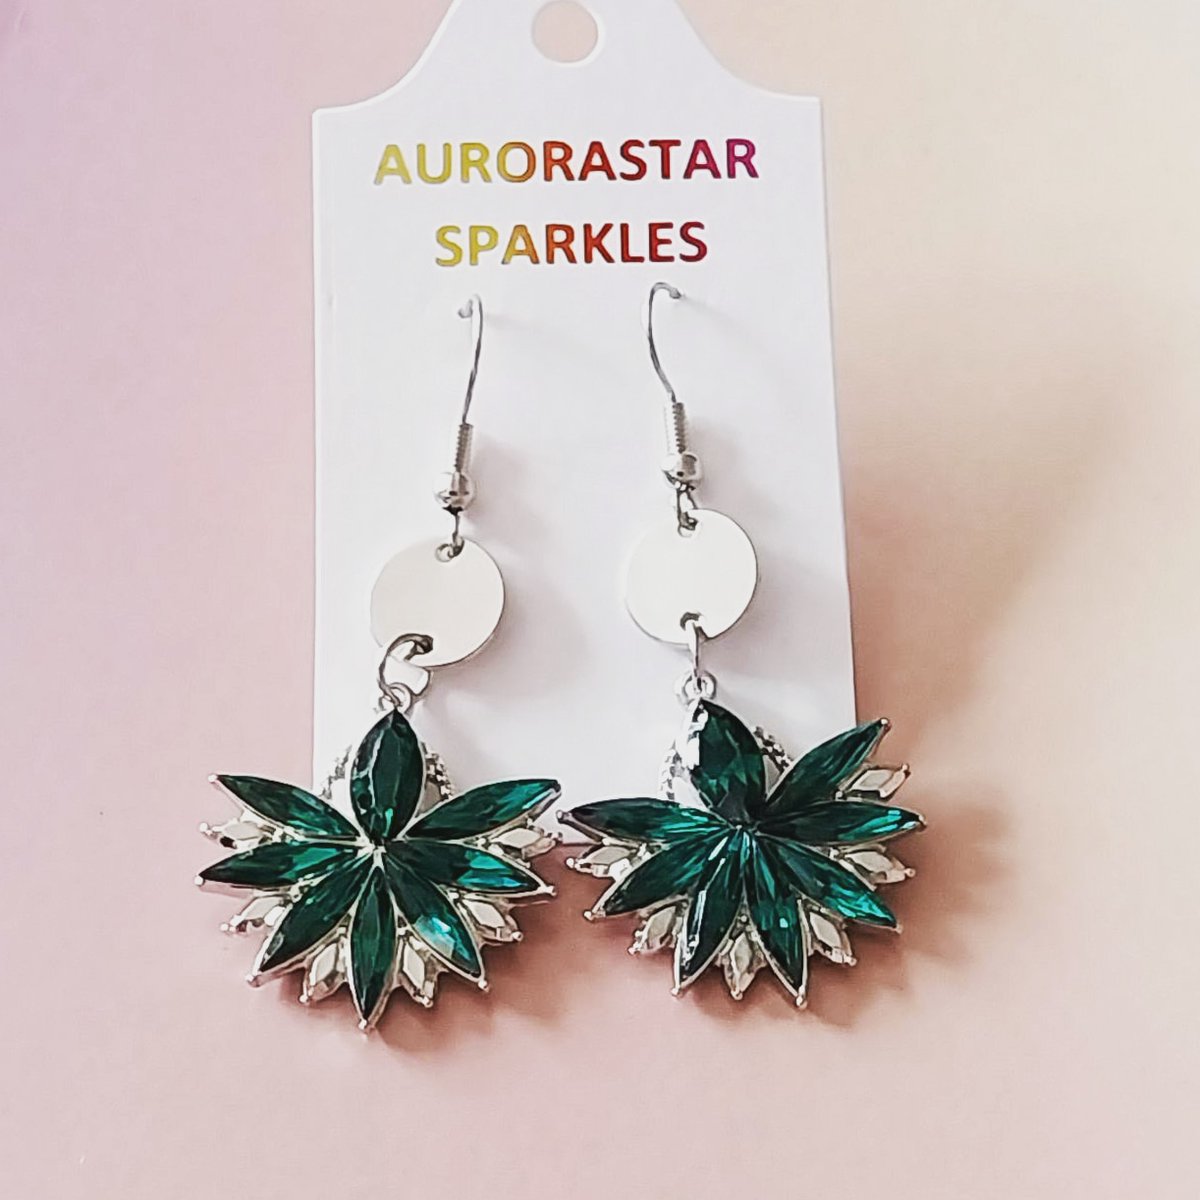 What do you think of these stunning new earrings 😍😍

I'm getting #artdeco vintage vibes 💖

#MHHSBD #earlybiz #shopindie #jewellery #handmade #earrings  #CraftBizParty #scottishcrafthour #UKMakers